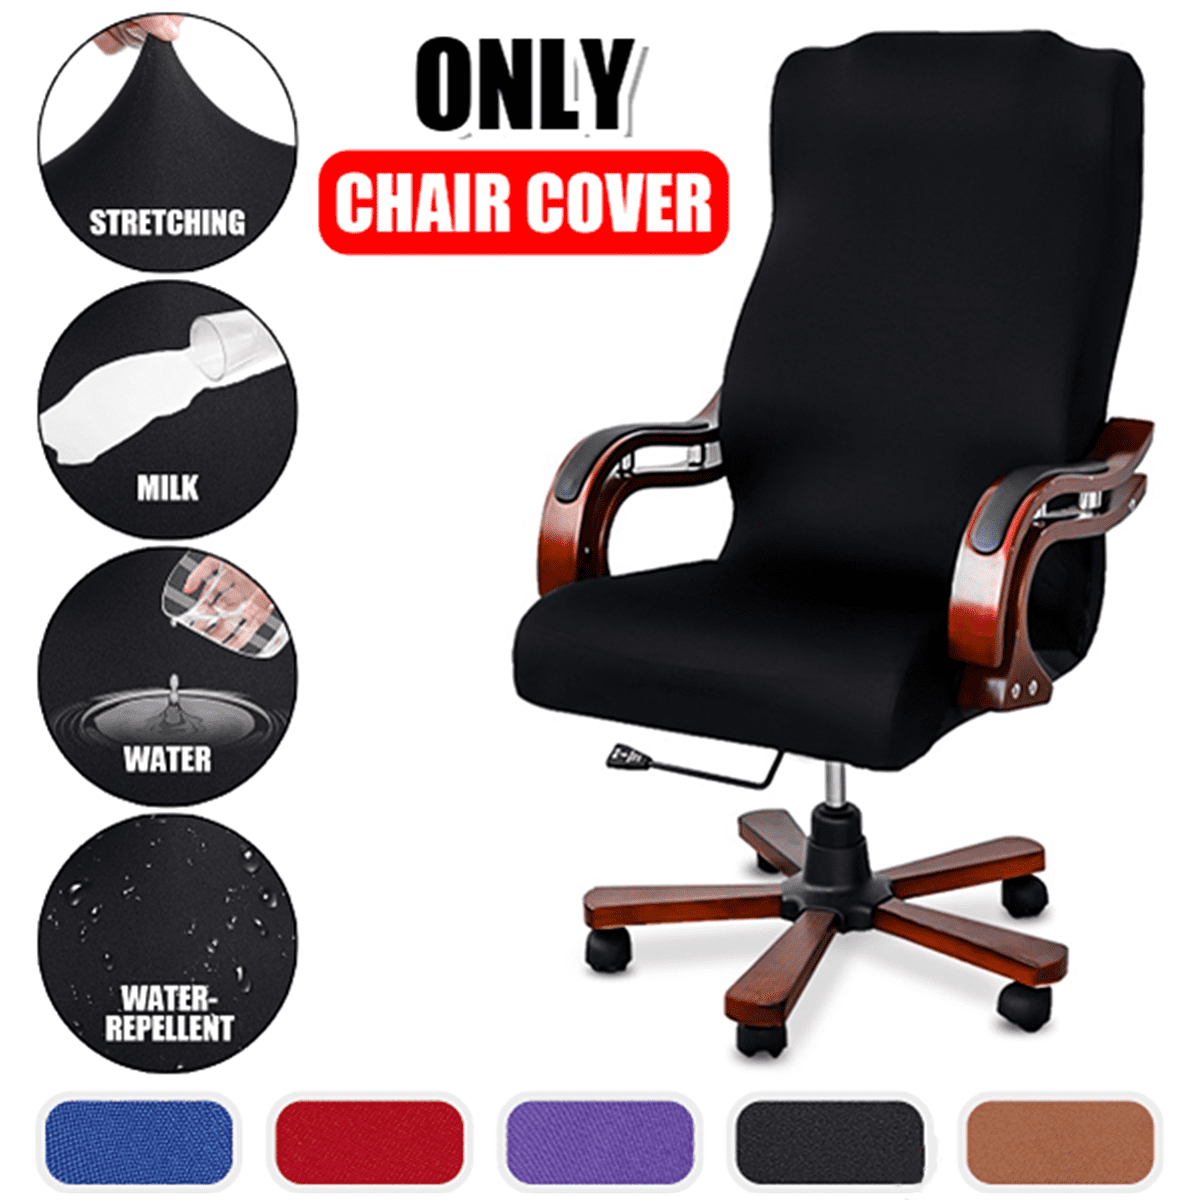 Removable Elastic Protector Office Armchair Cover for Work Station Desk Chair Rotating Chair black 1 Pair Office Desk Chair Armrest Slipcovers Yosoo Health Gear Office Computer Chair Arm Covers 